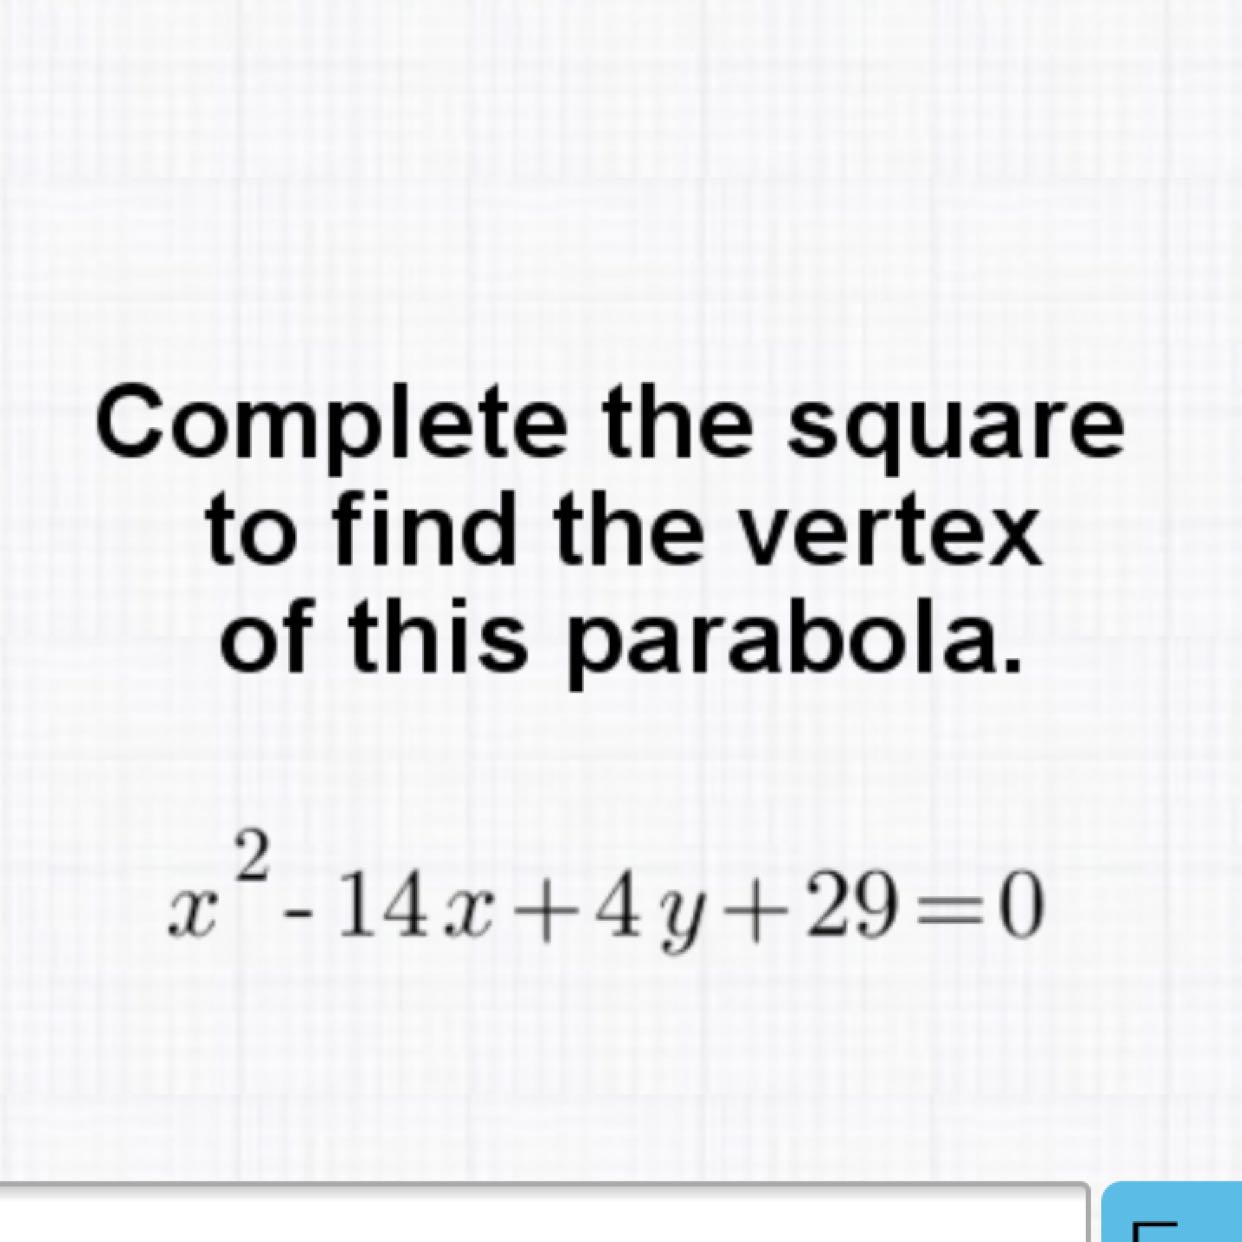 Complete the square to find the vertex of this parabola.
\[
x^{2}-14 x+4 y+29=0
\]